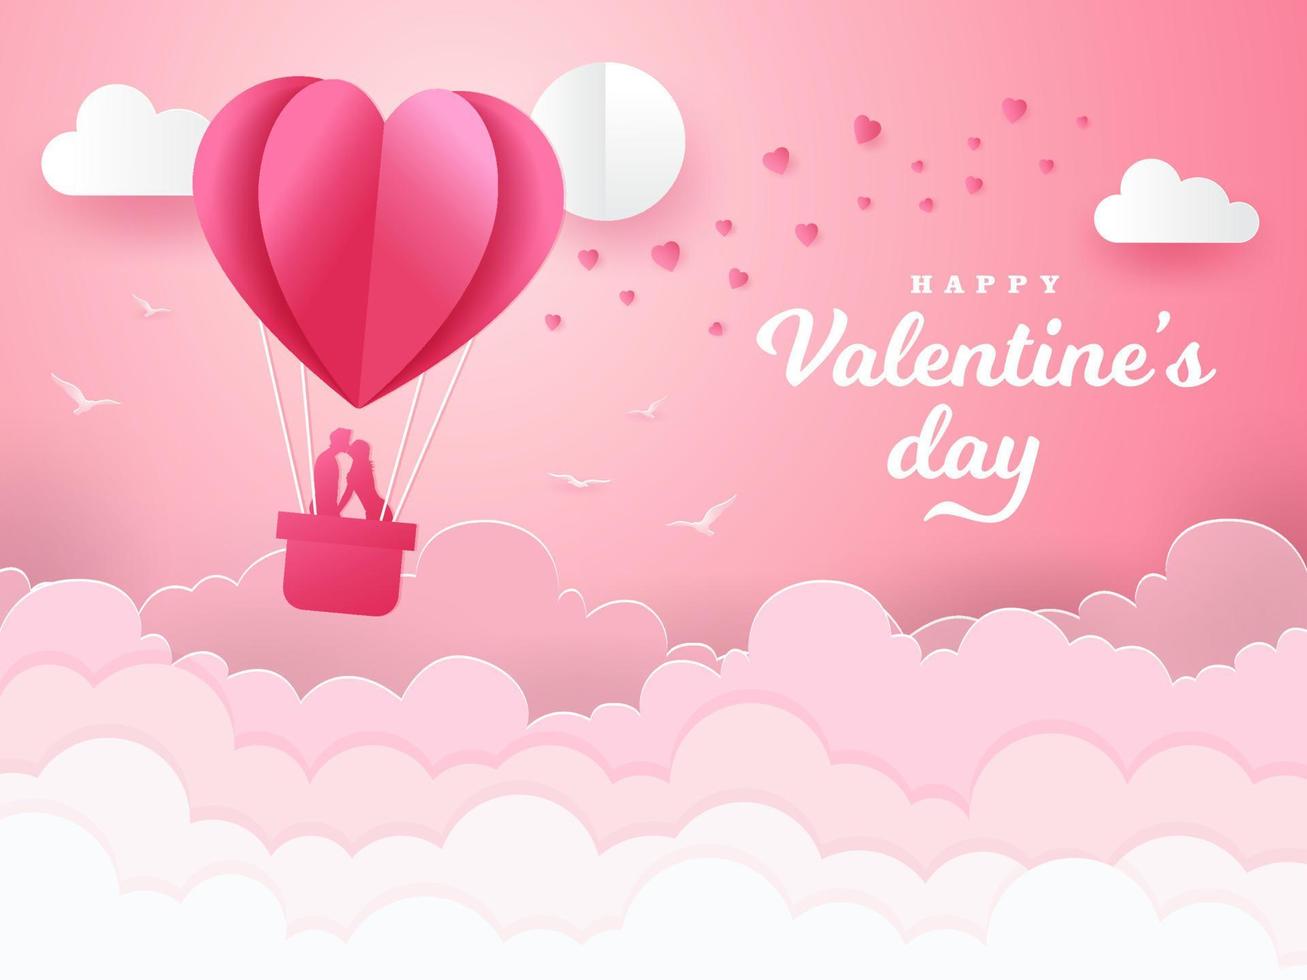 Valentine's Day background with romantic couple kissing and standing inside a basket of an air balloon vector